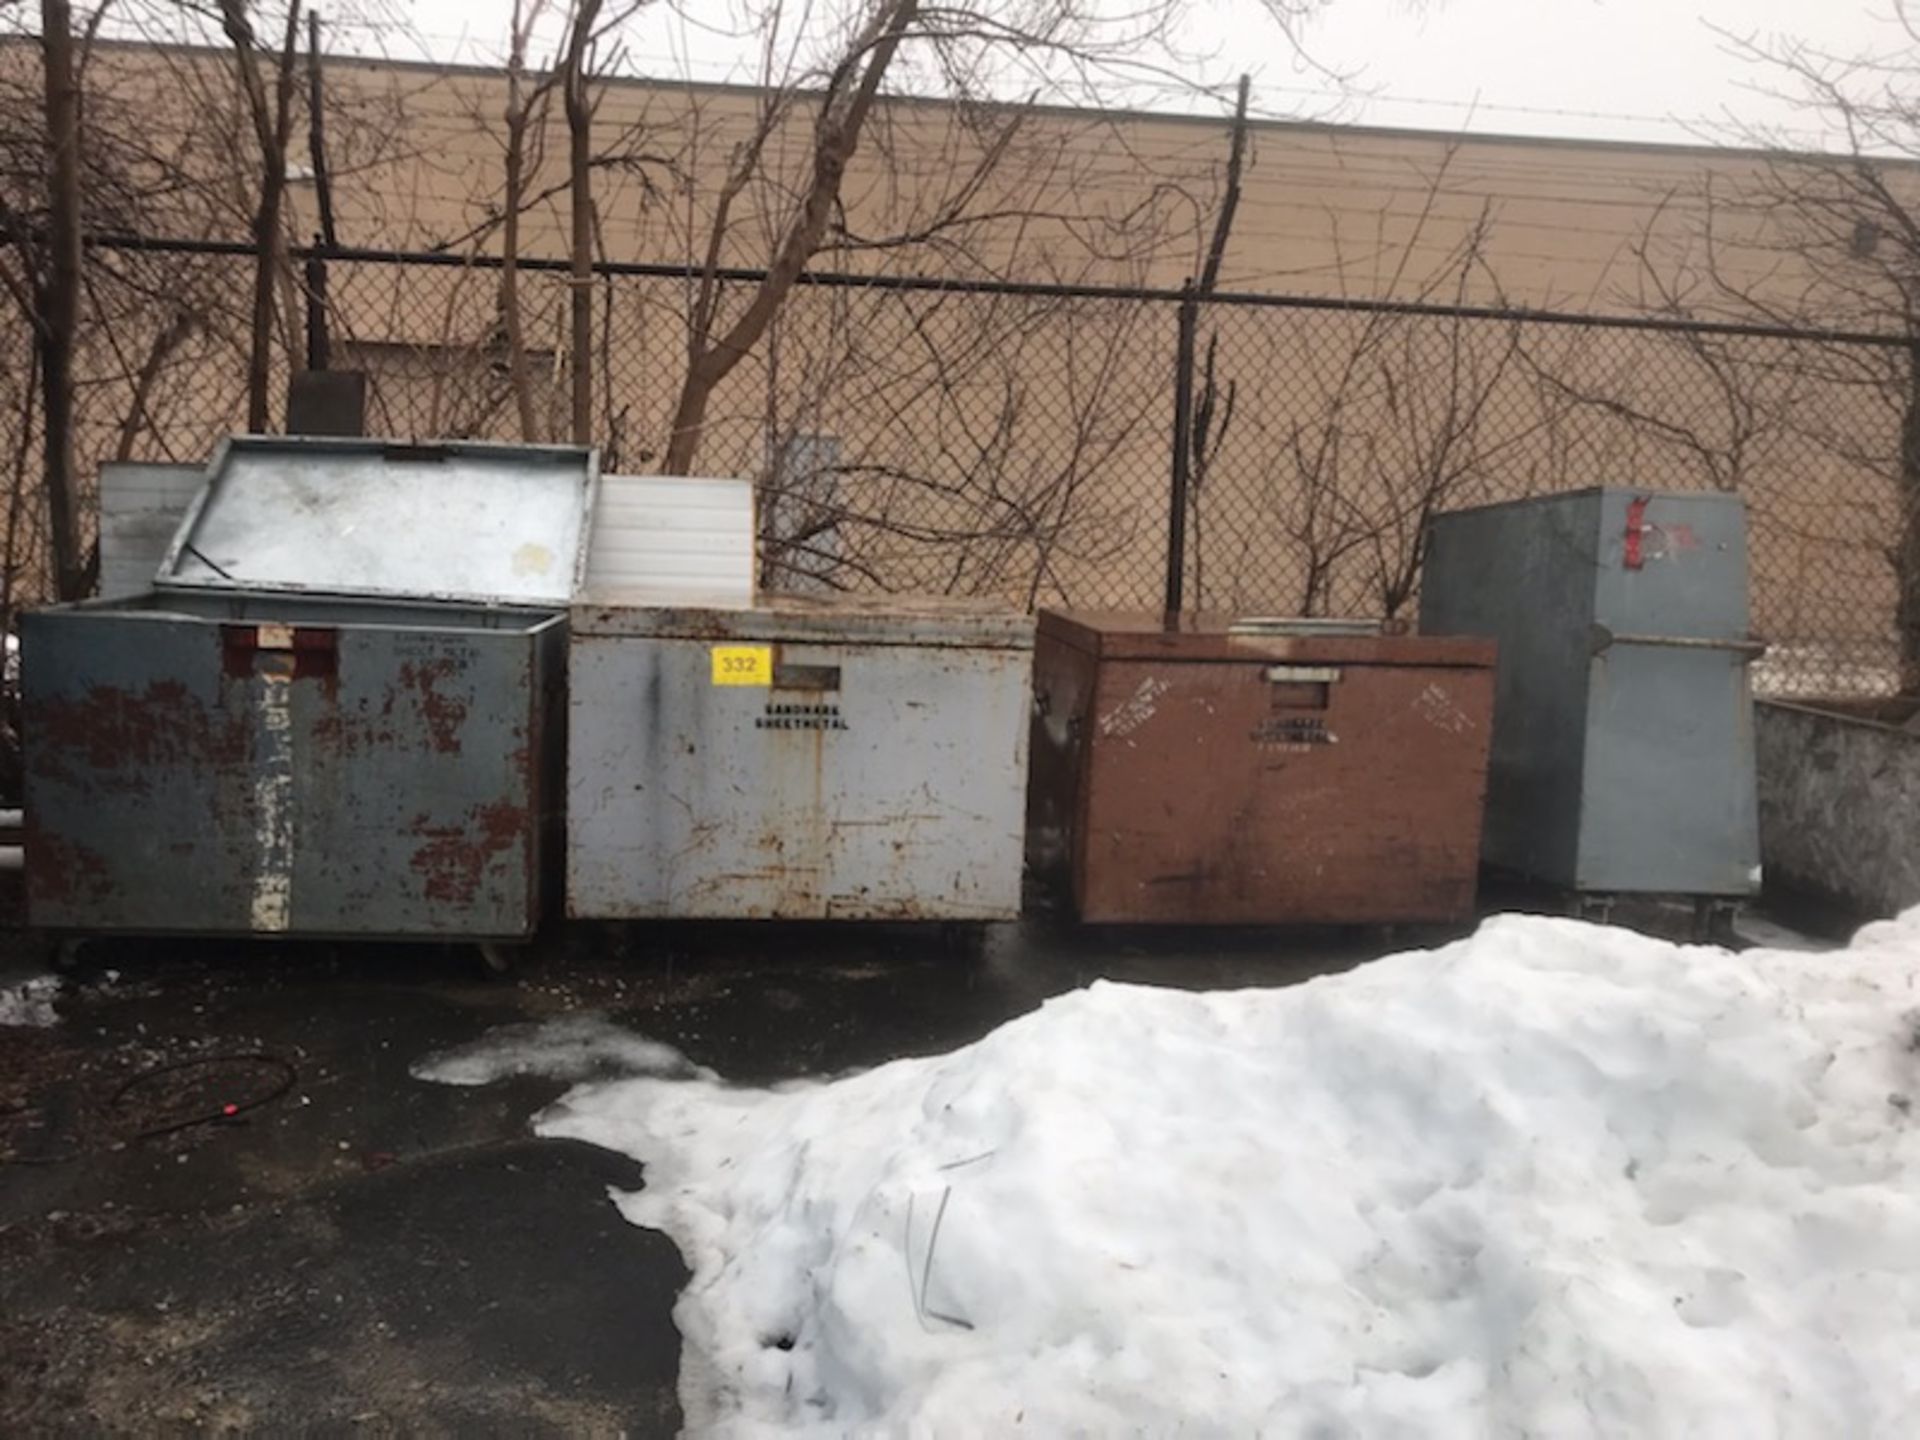 LOT OF (4) JOB BOXES (IN YARD)